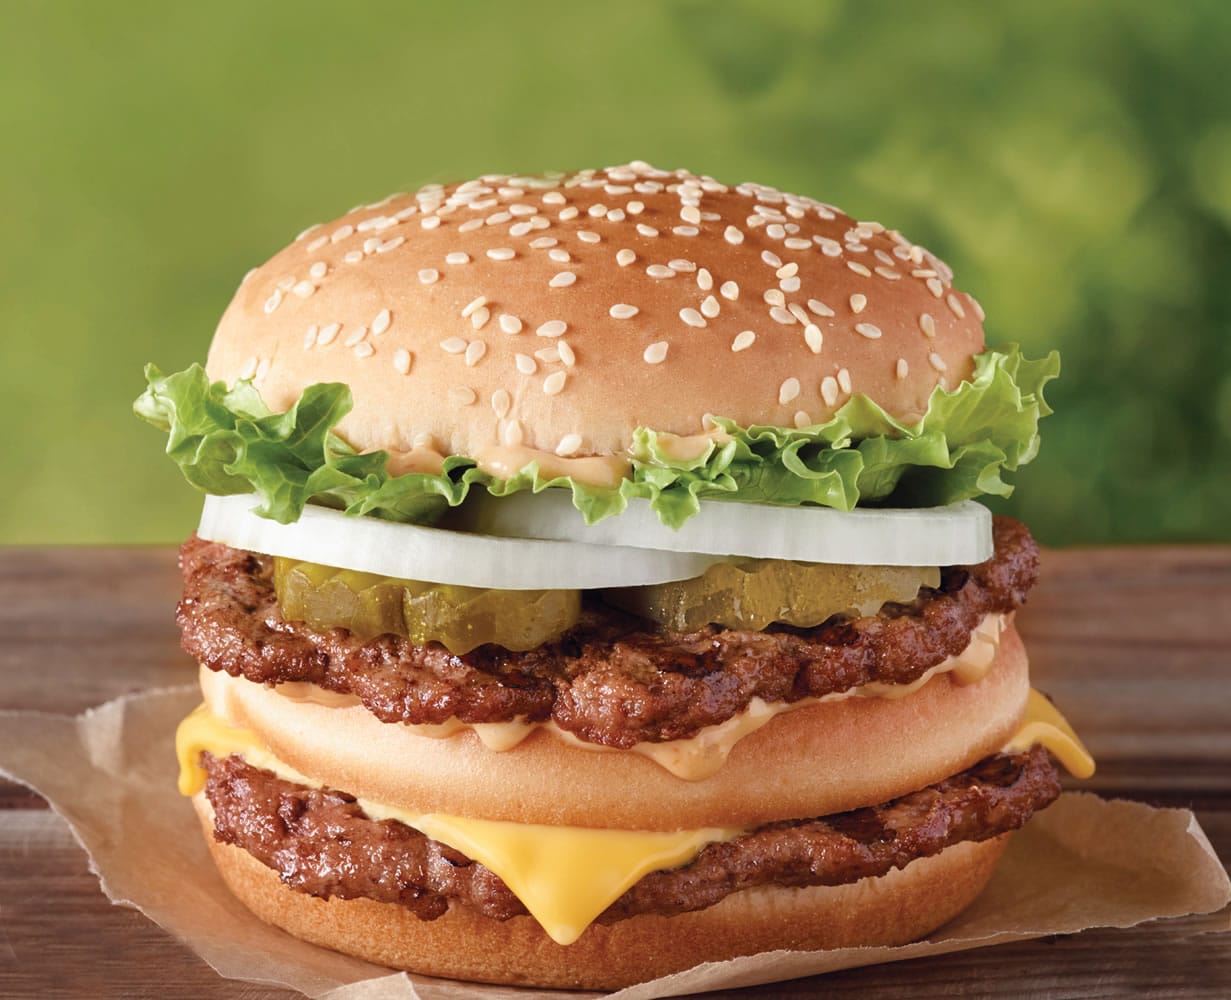 The Big King sandwich is a permanent addition to the Burger King menu as of this week.